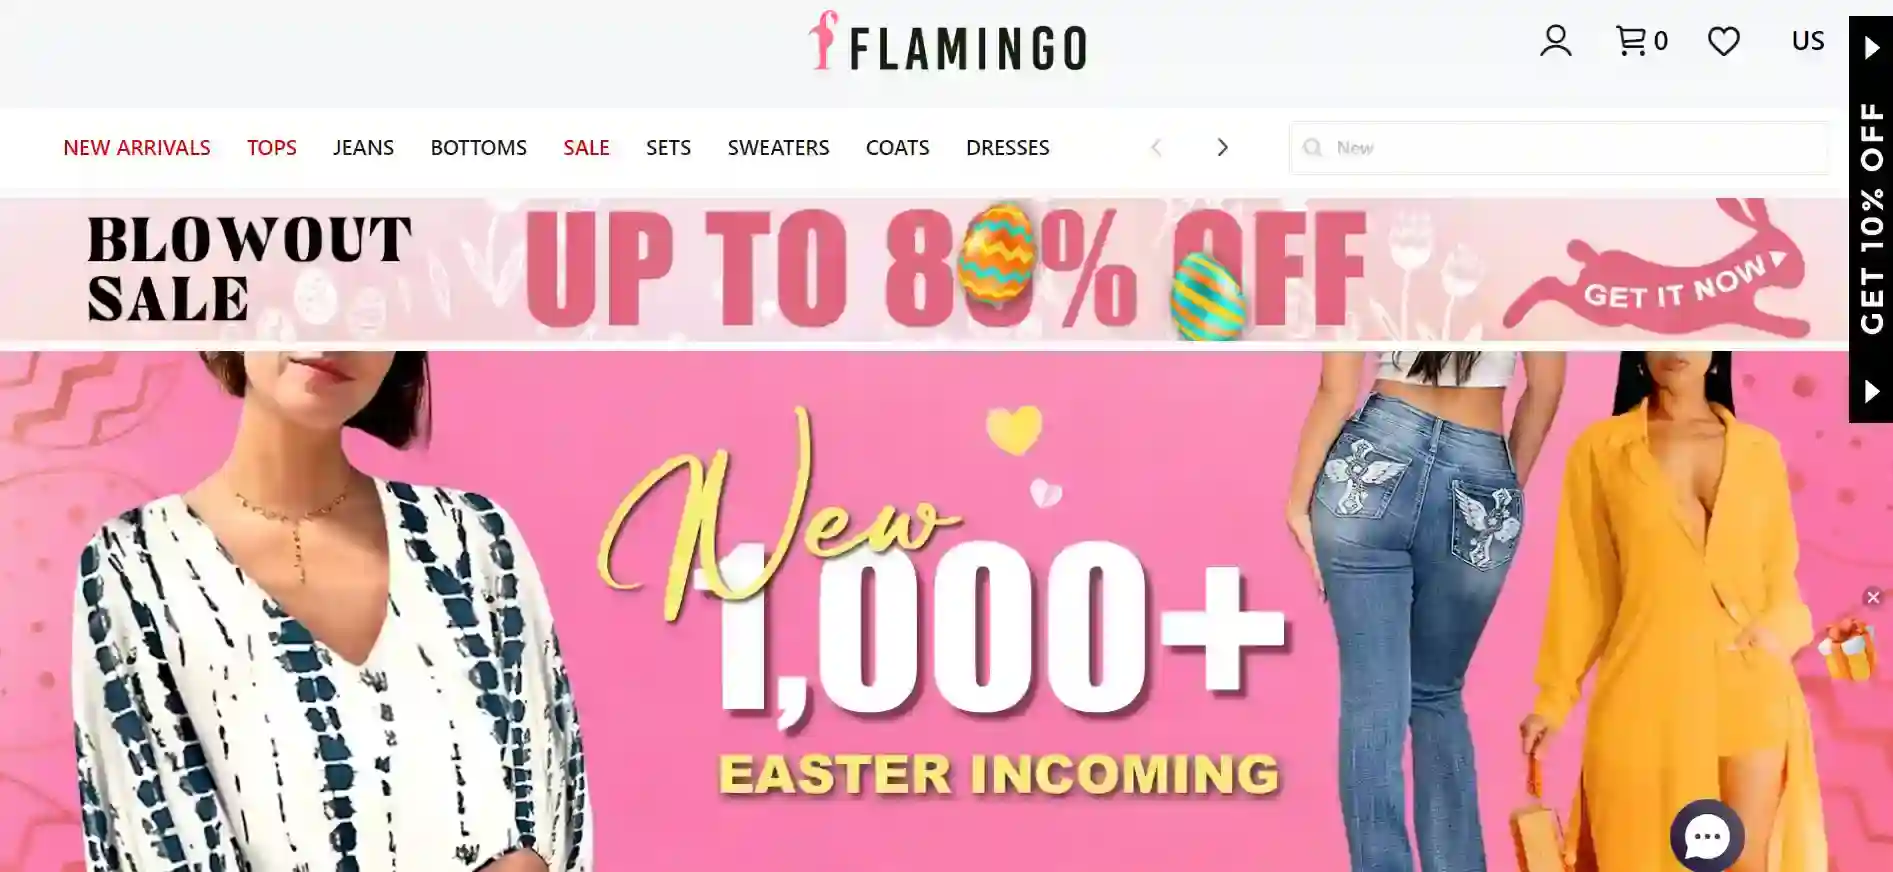 You are currently viewing Flamingo Clothes Reviews: Legit or Scam? A Comprehensive Analysis